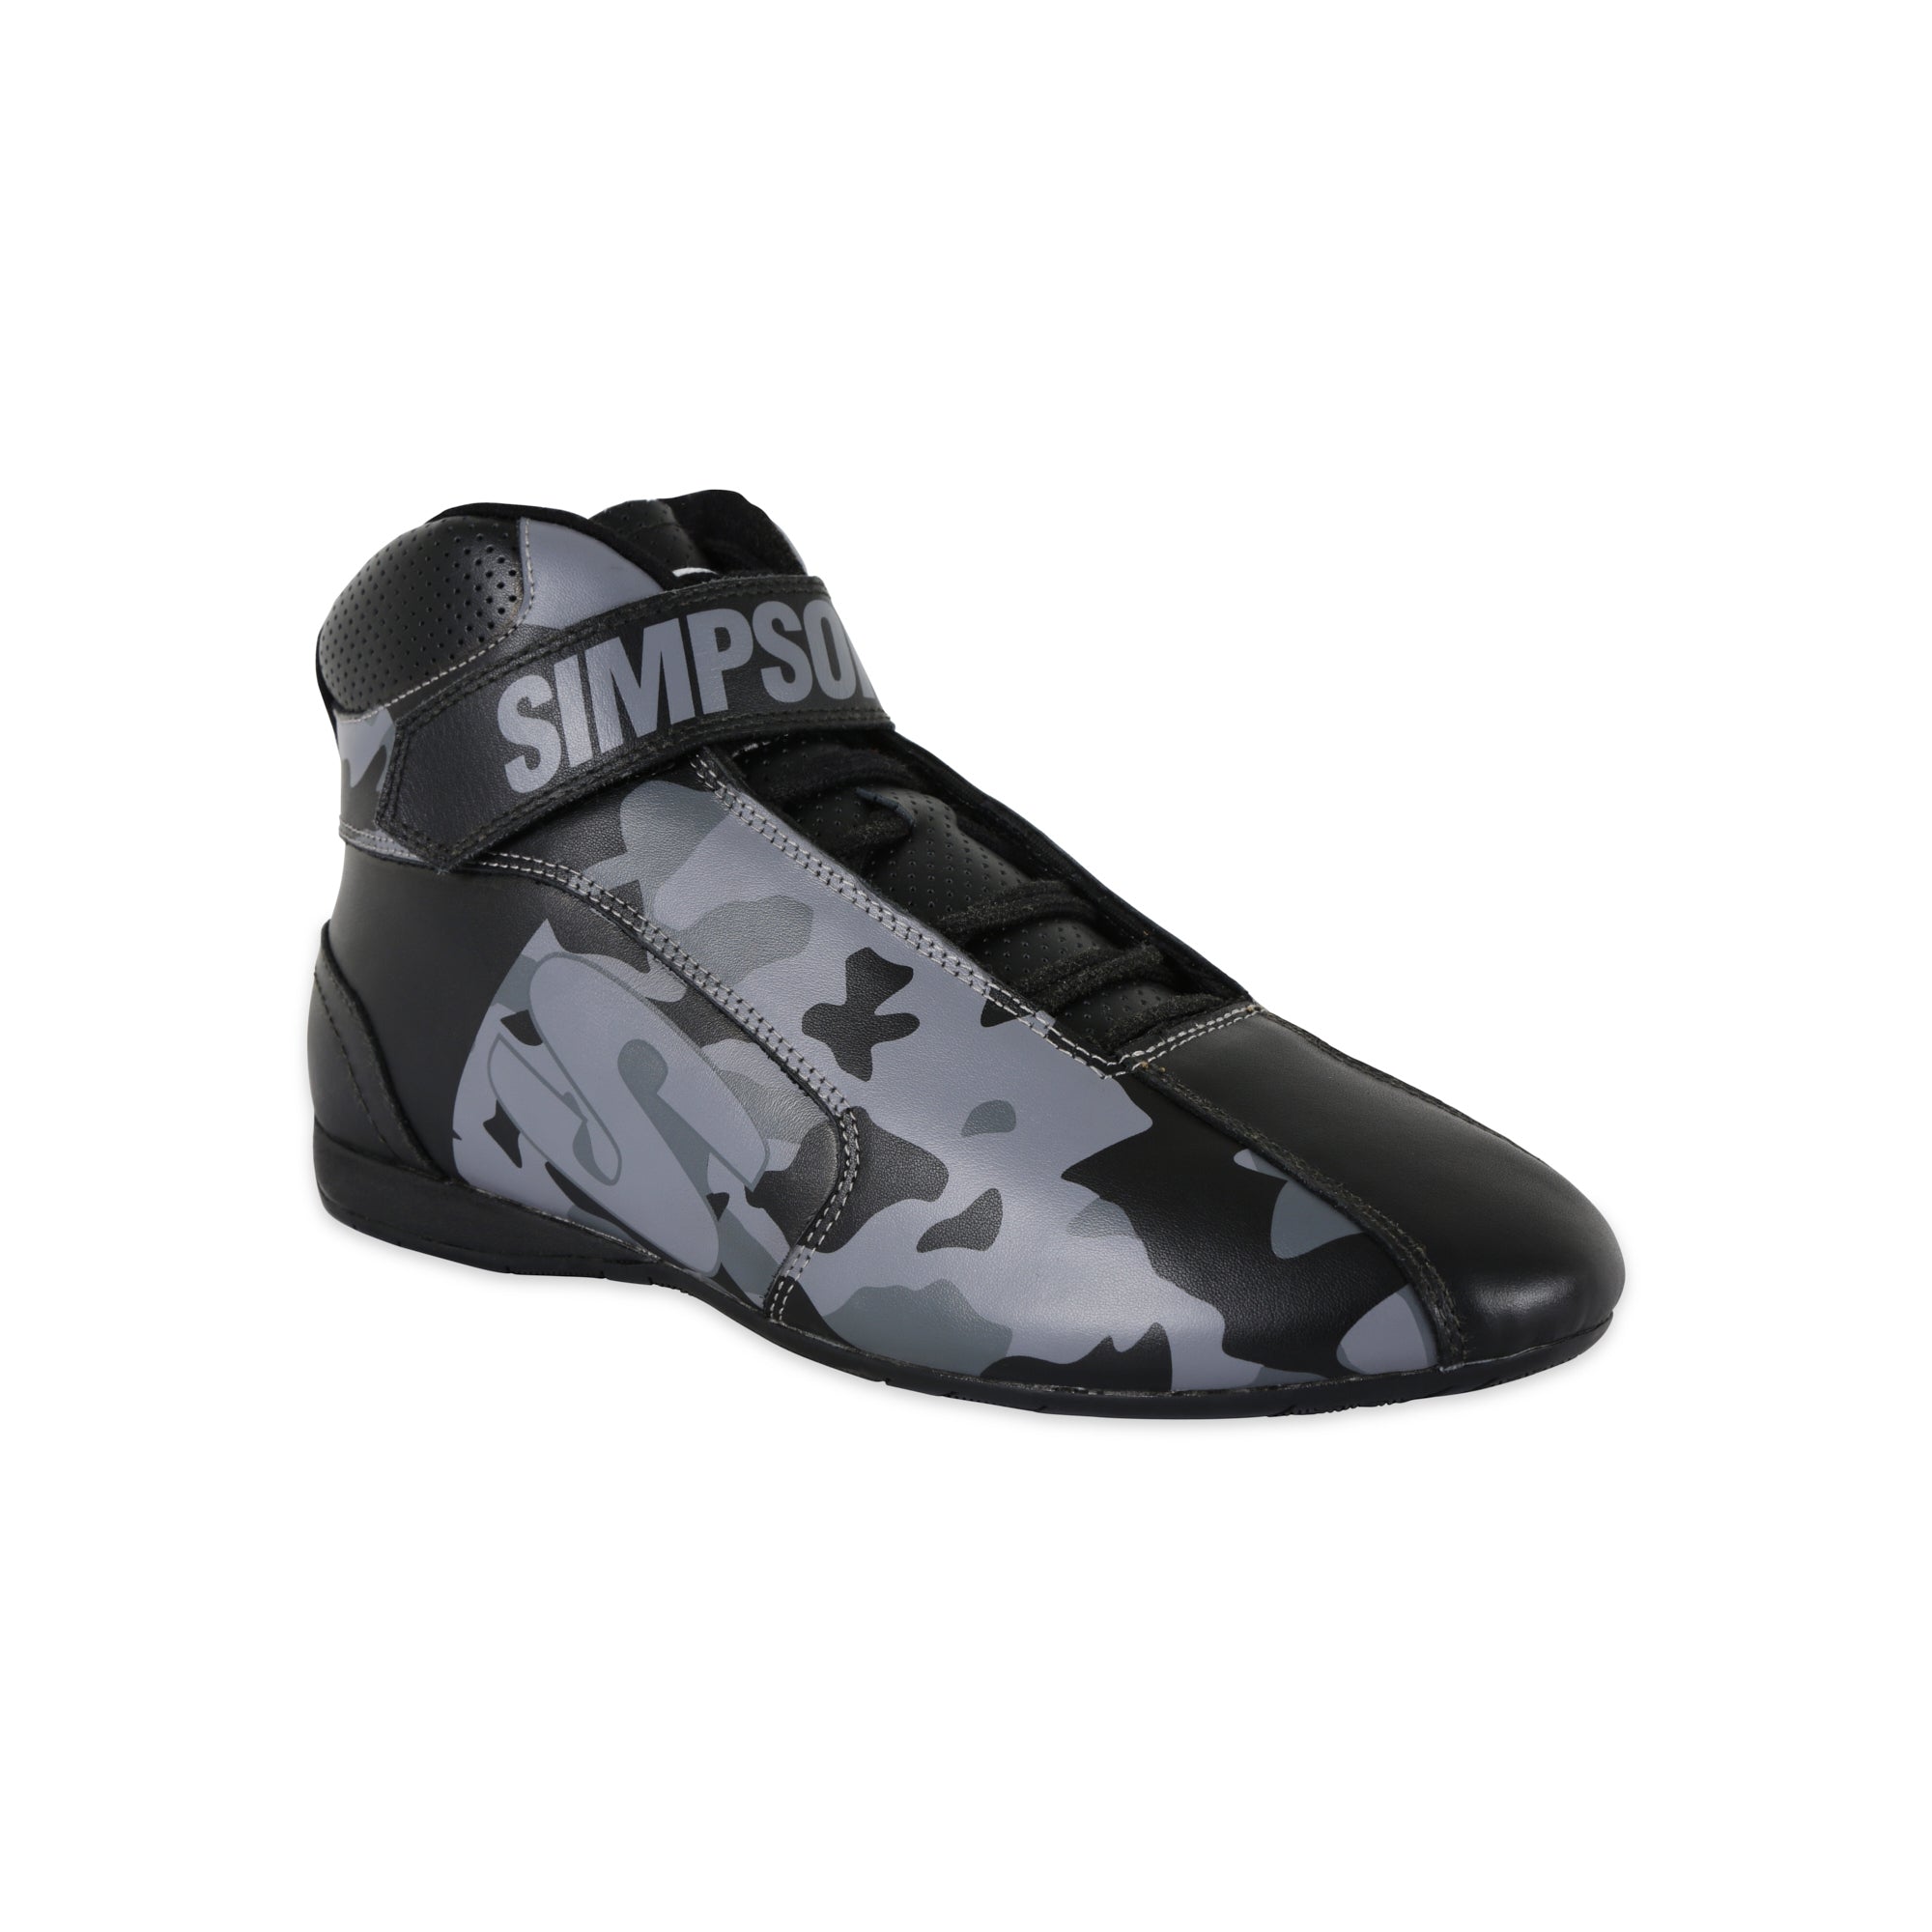 Simpson Shoe DNA X2 Blackout Size 12 Safety Clothing Driving Shoes and Boots main image